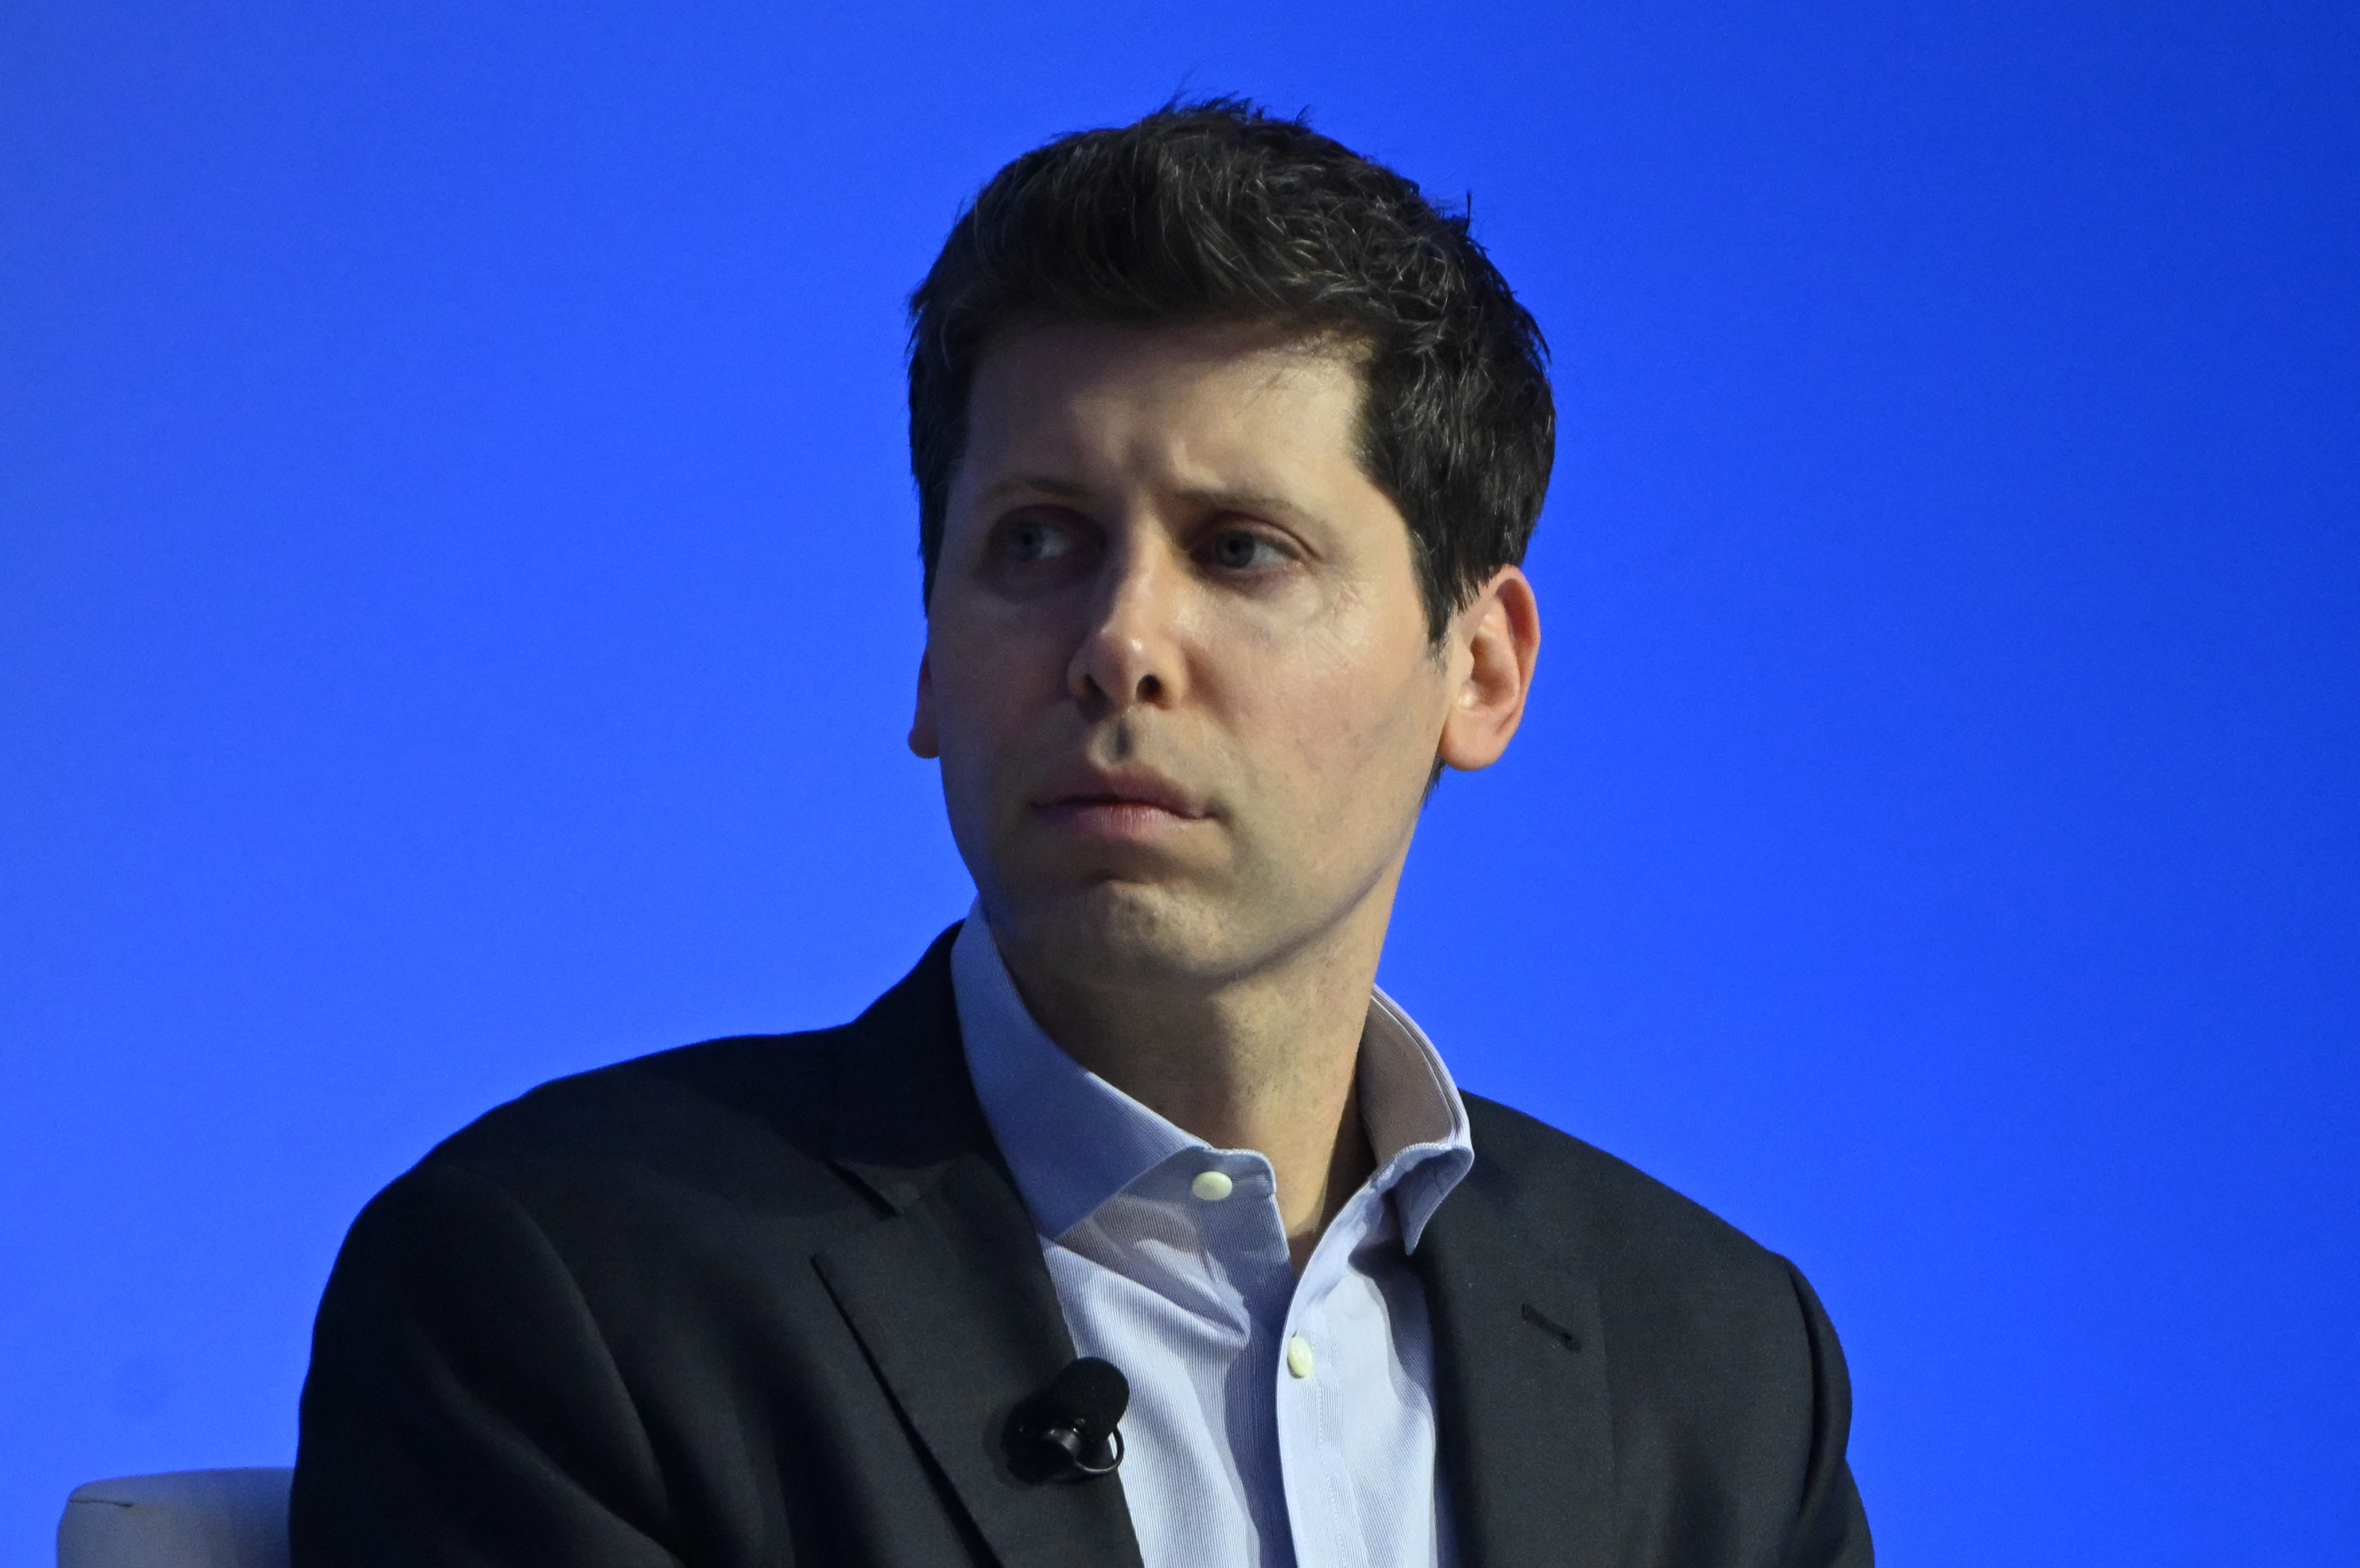 Sam Altman, CEO of OpenAI looks offscreen with a blue background.